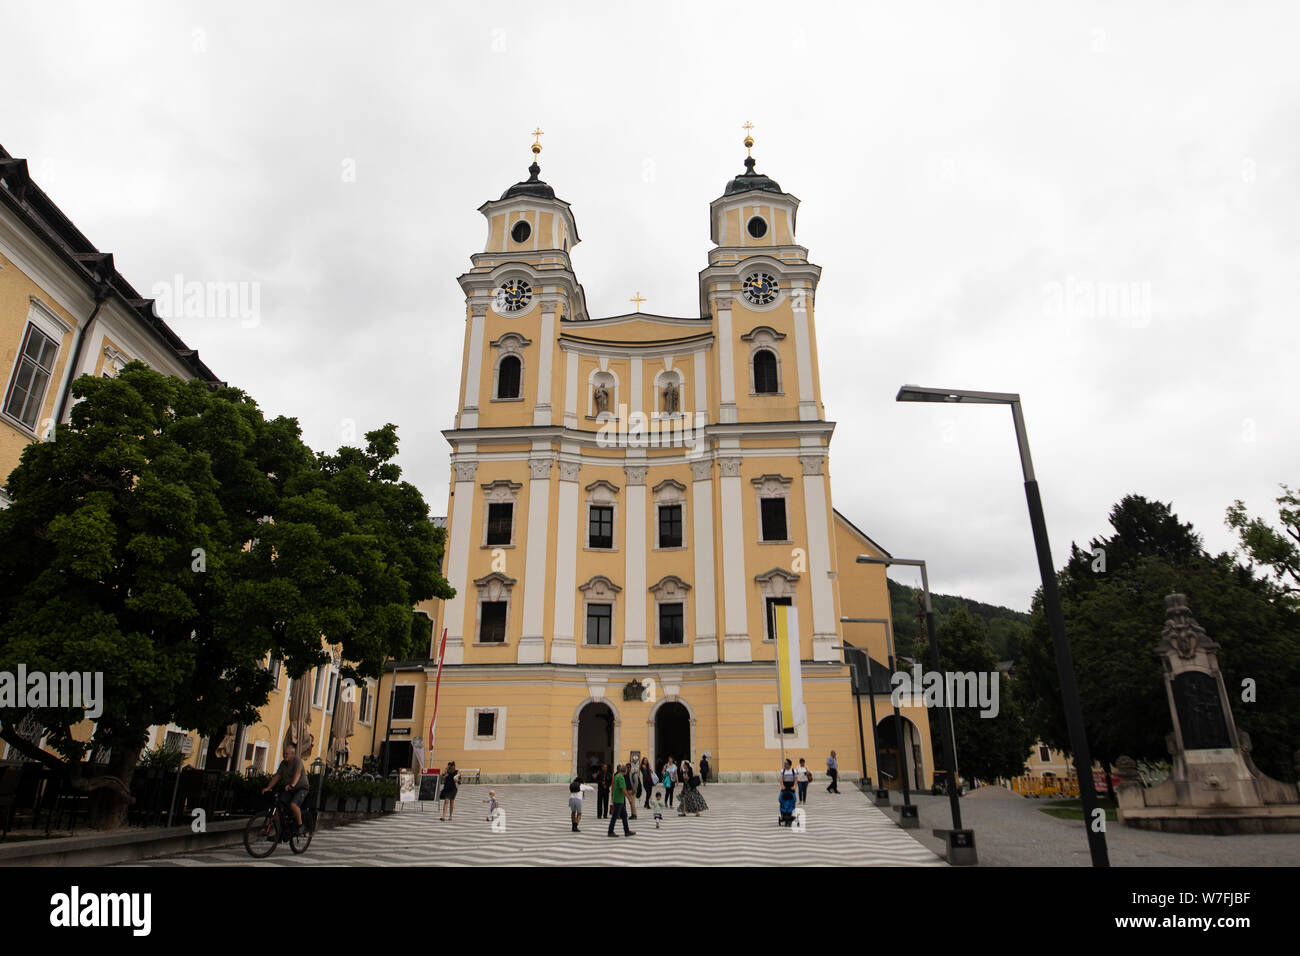 St Michael's Basilica in Mondsee, Austria, a church famous for the wedding scene in the movie The Sound of Music. Stock Photo